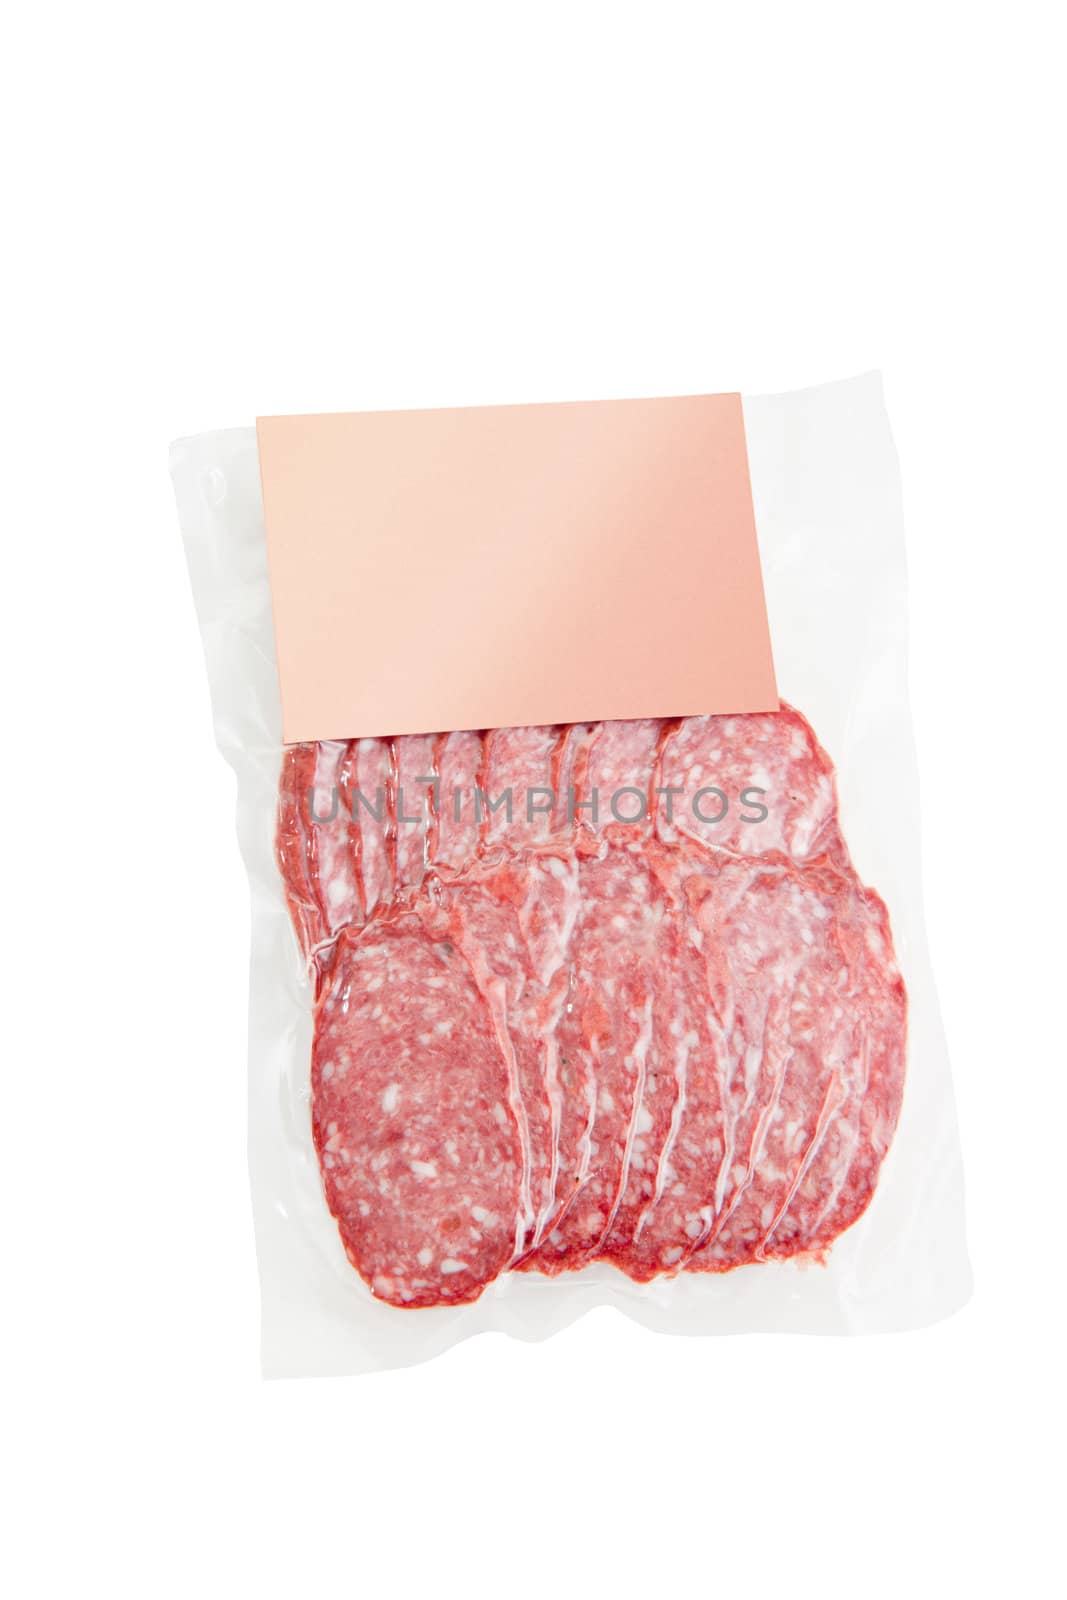 sliced meat packaged isolated on white background